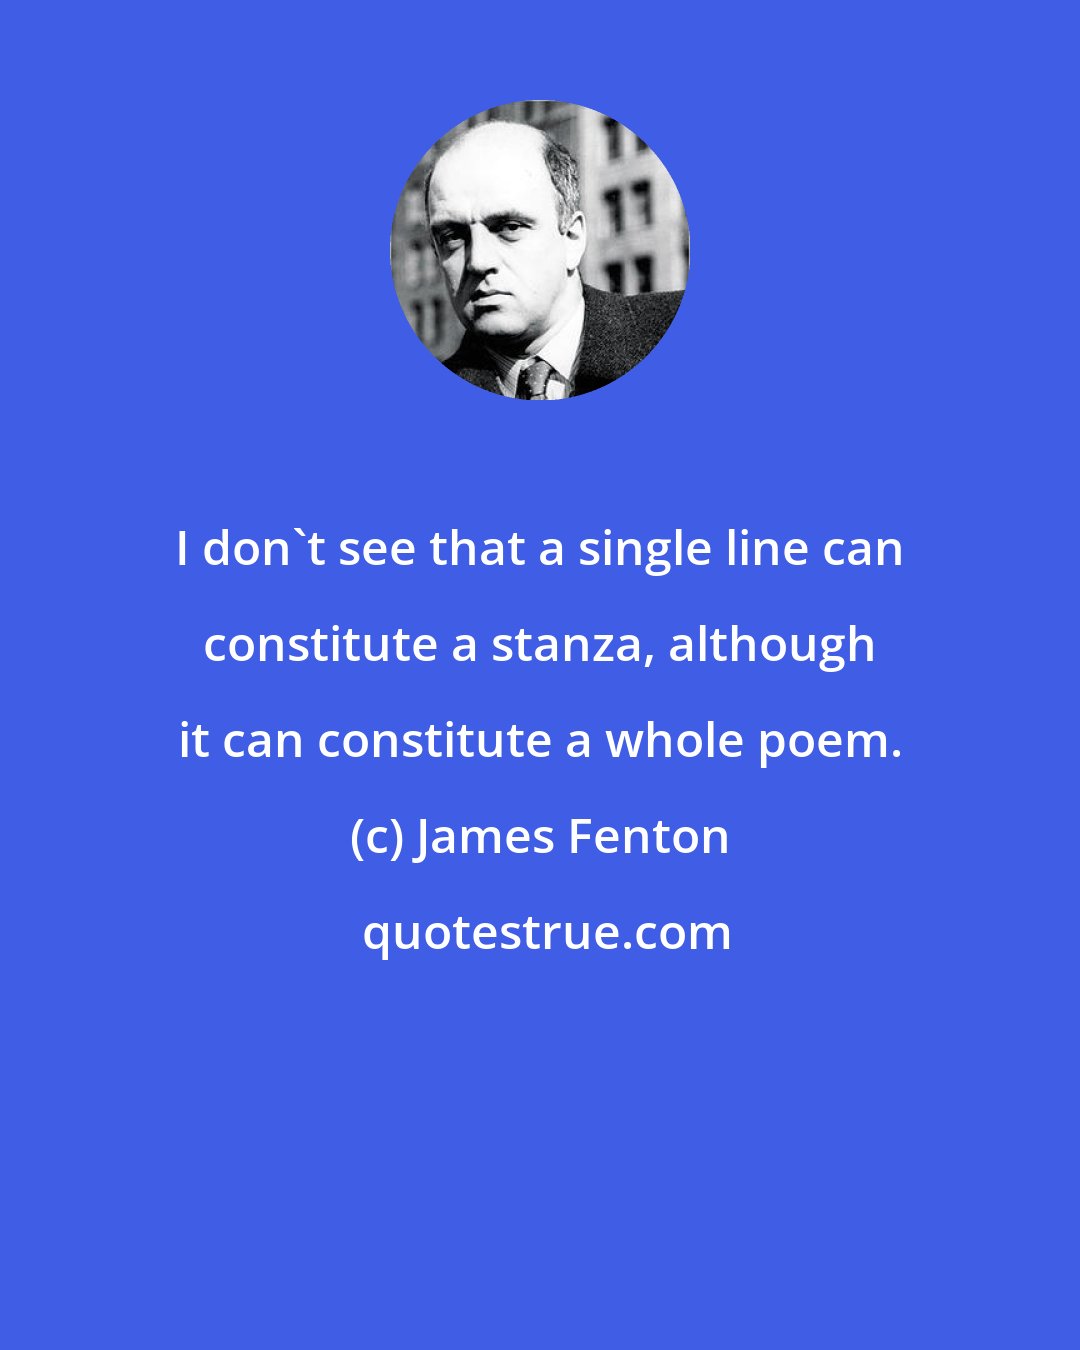 James Fenton: I don't see that a single line can constitute a stanza, although it can constitute a whole poem.